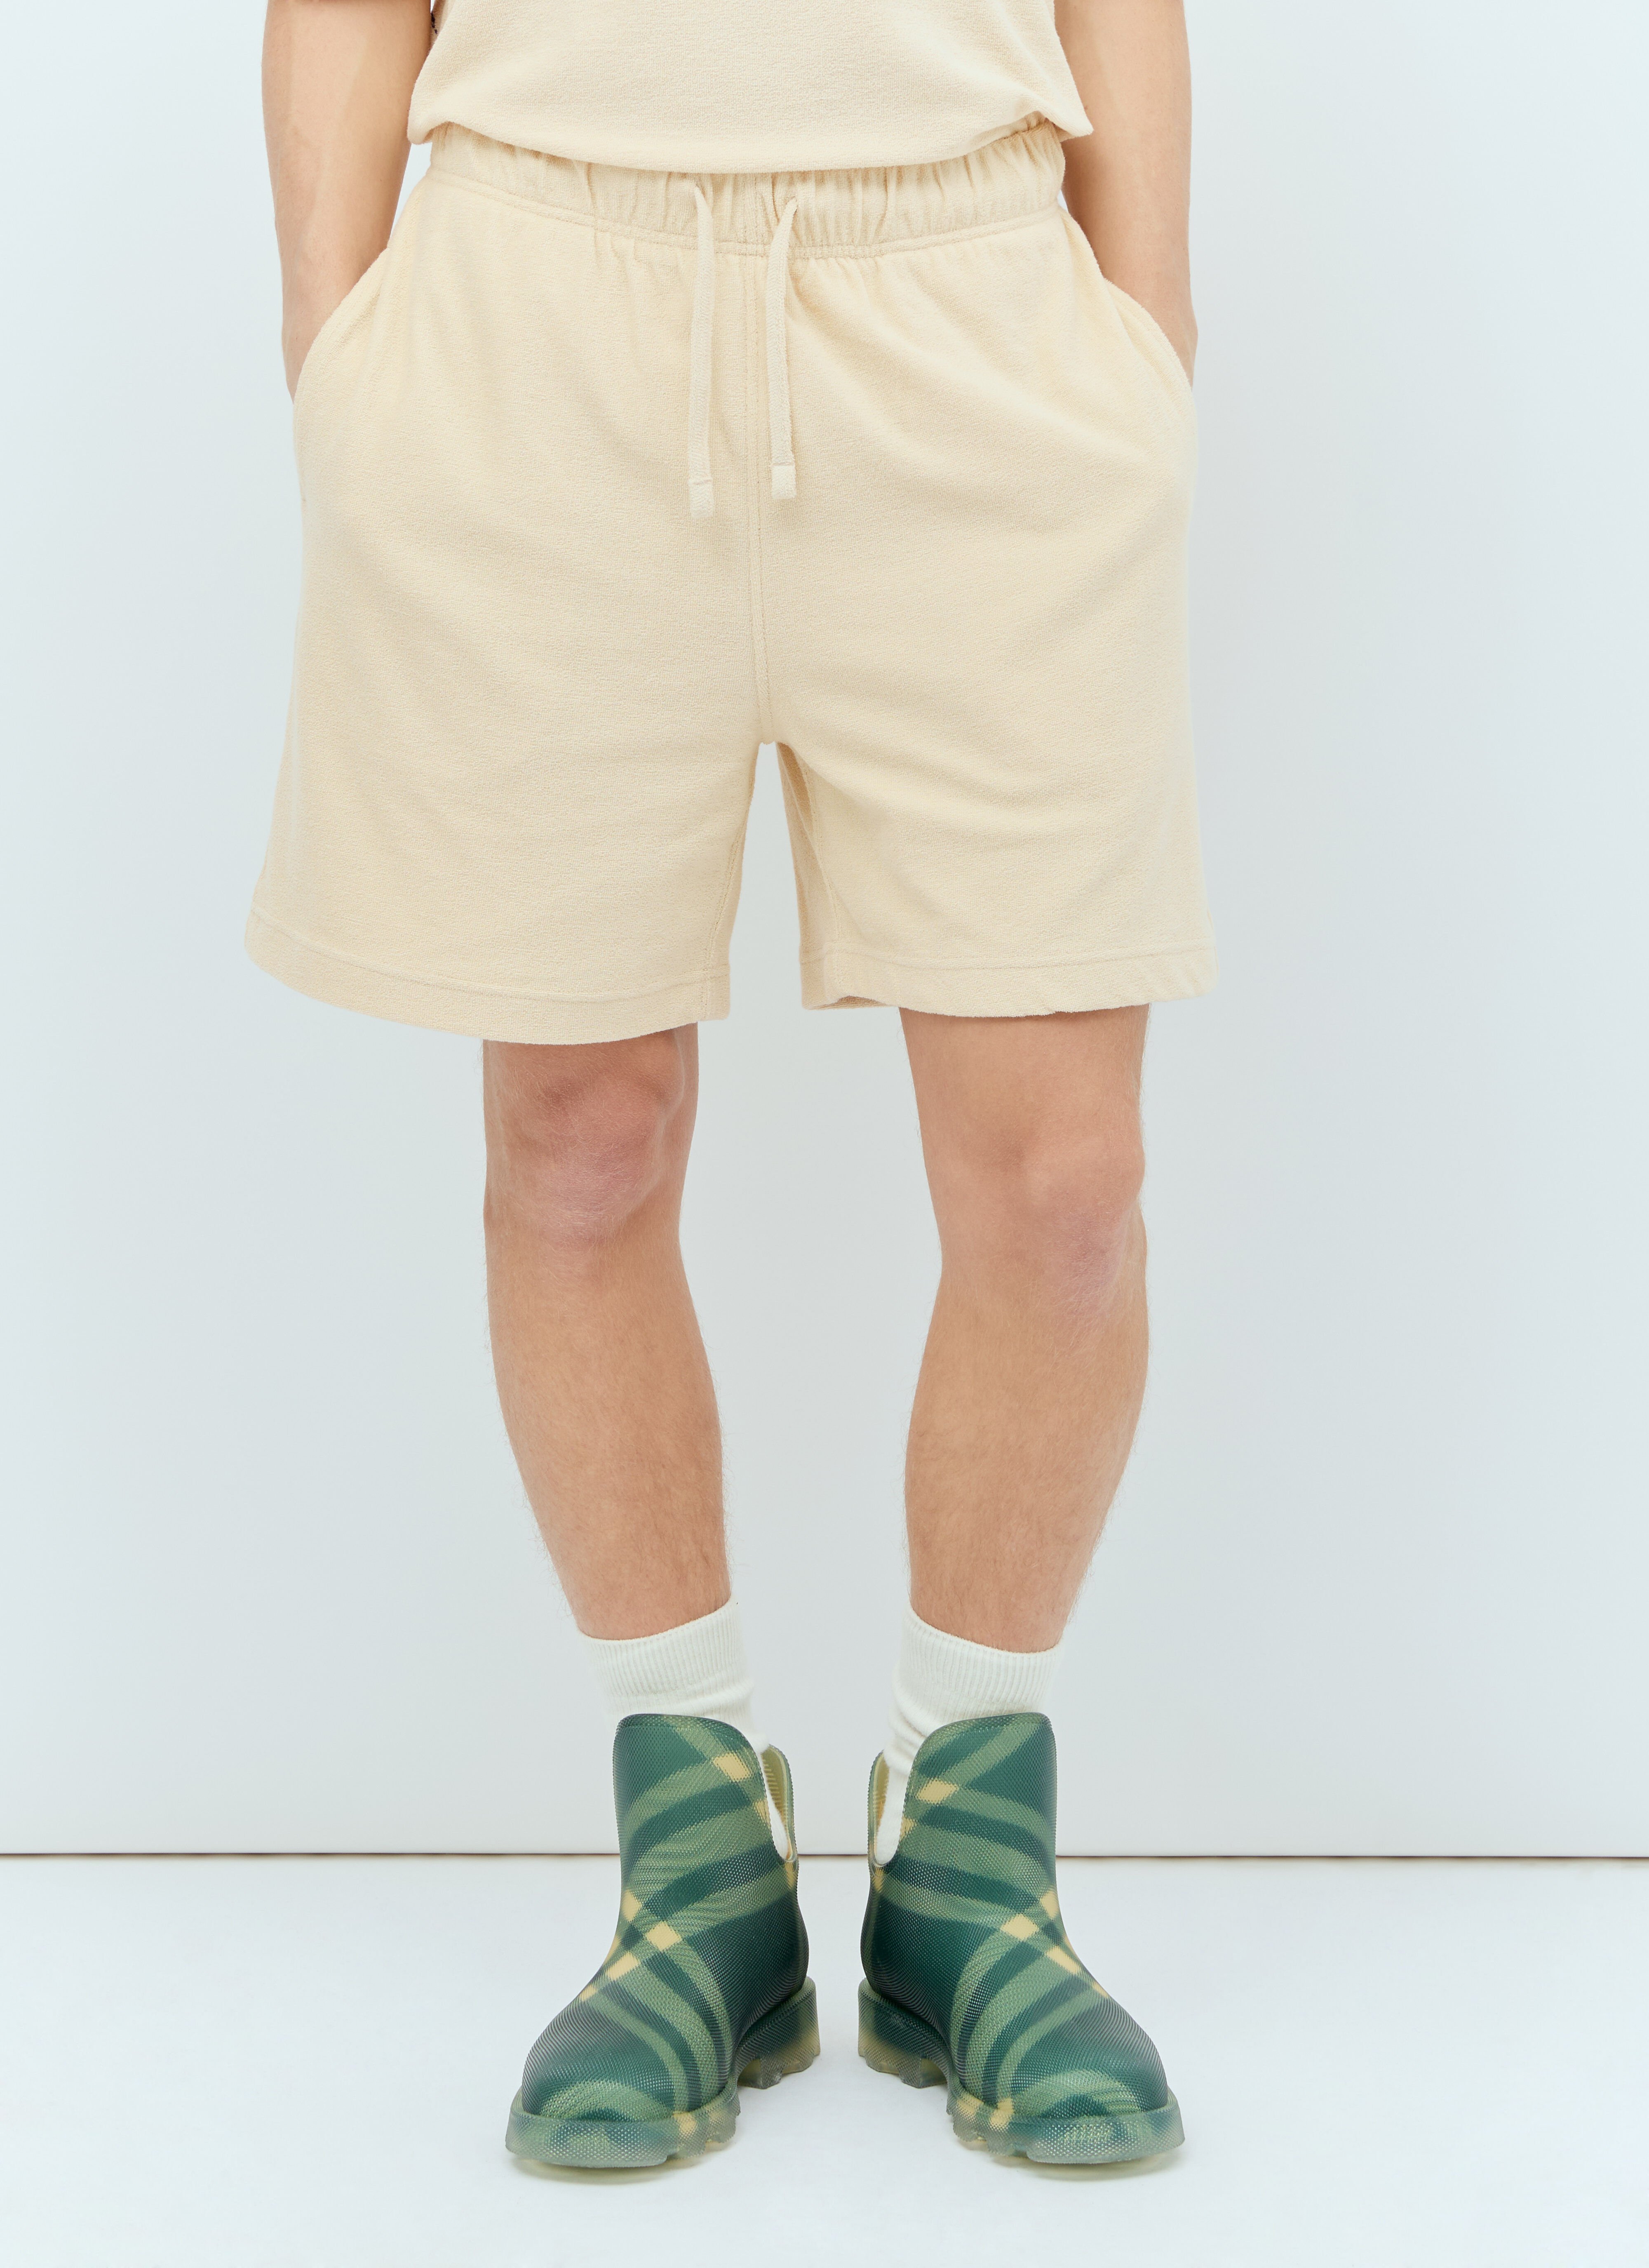 Carhartt WIP Cotton Towelling Shorts Blue wip0156005